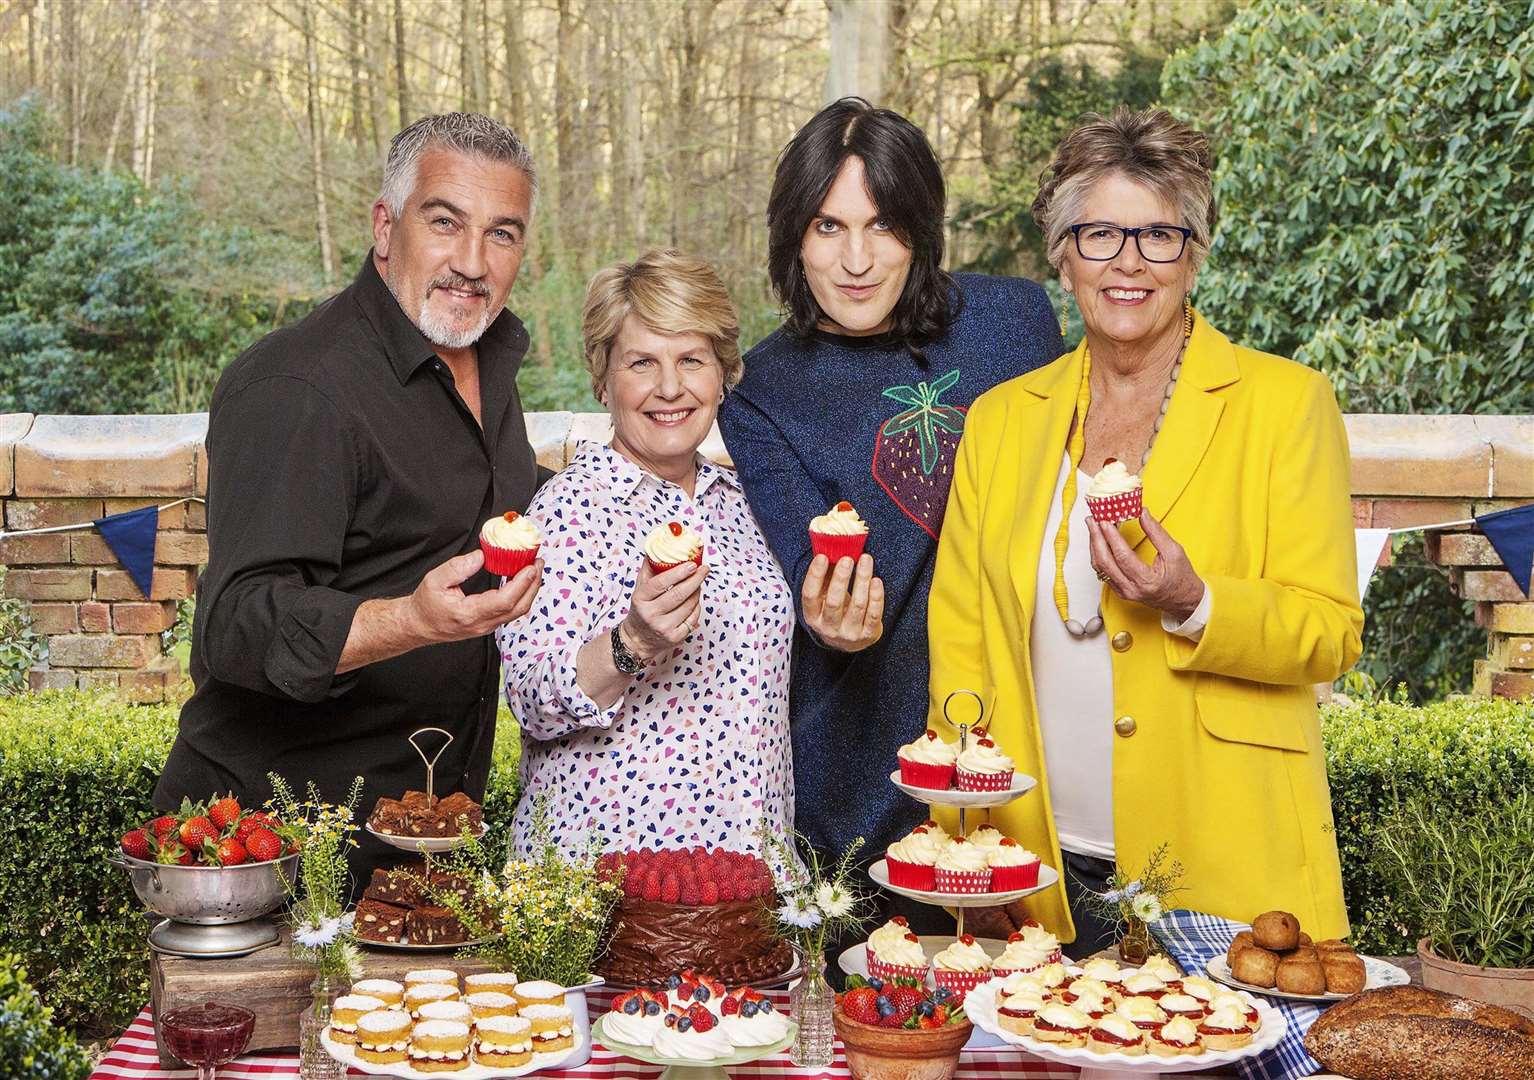 Sandi Toksvig charmed viewers on The Great British Bake Off between 2017 and 2020. Picture: Channel 4